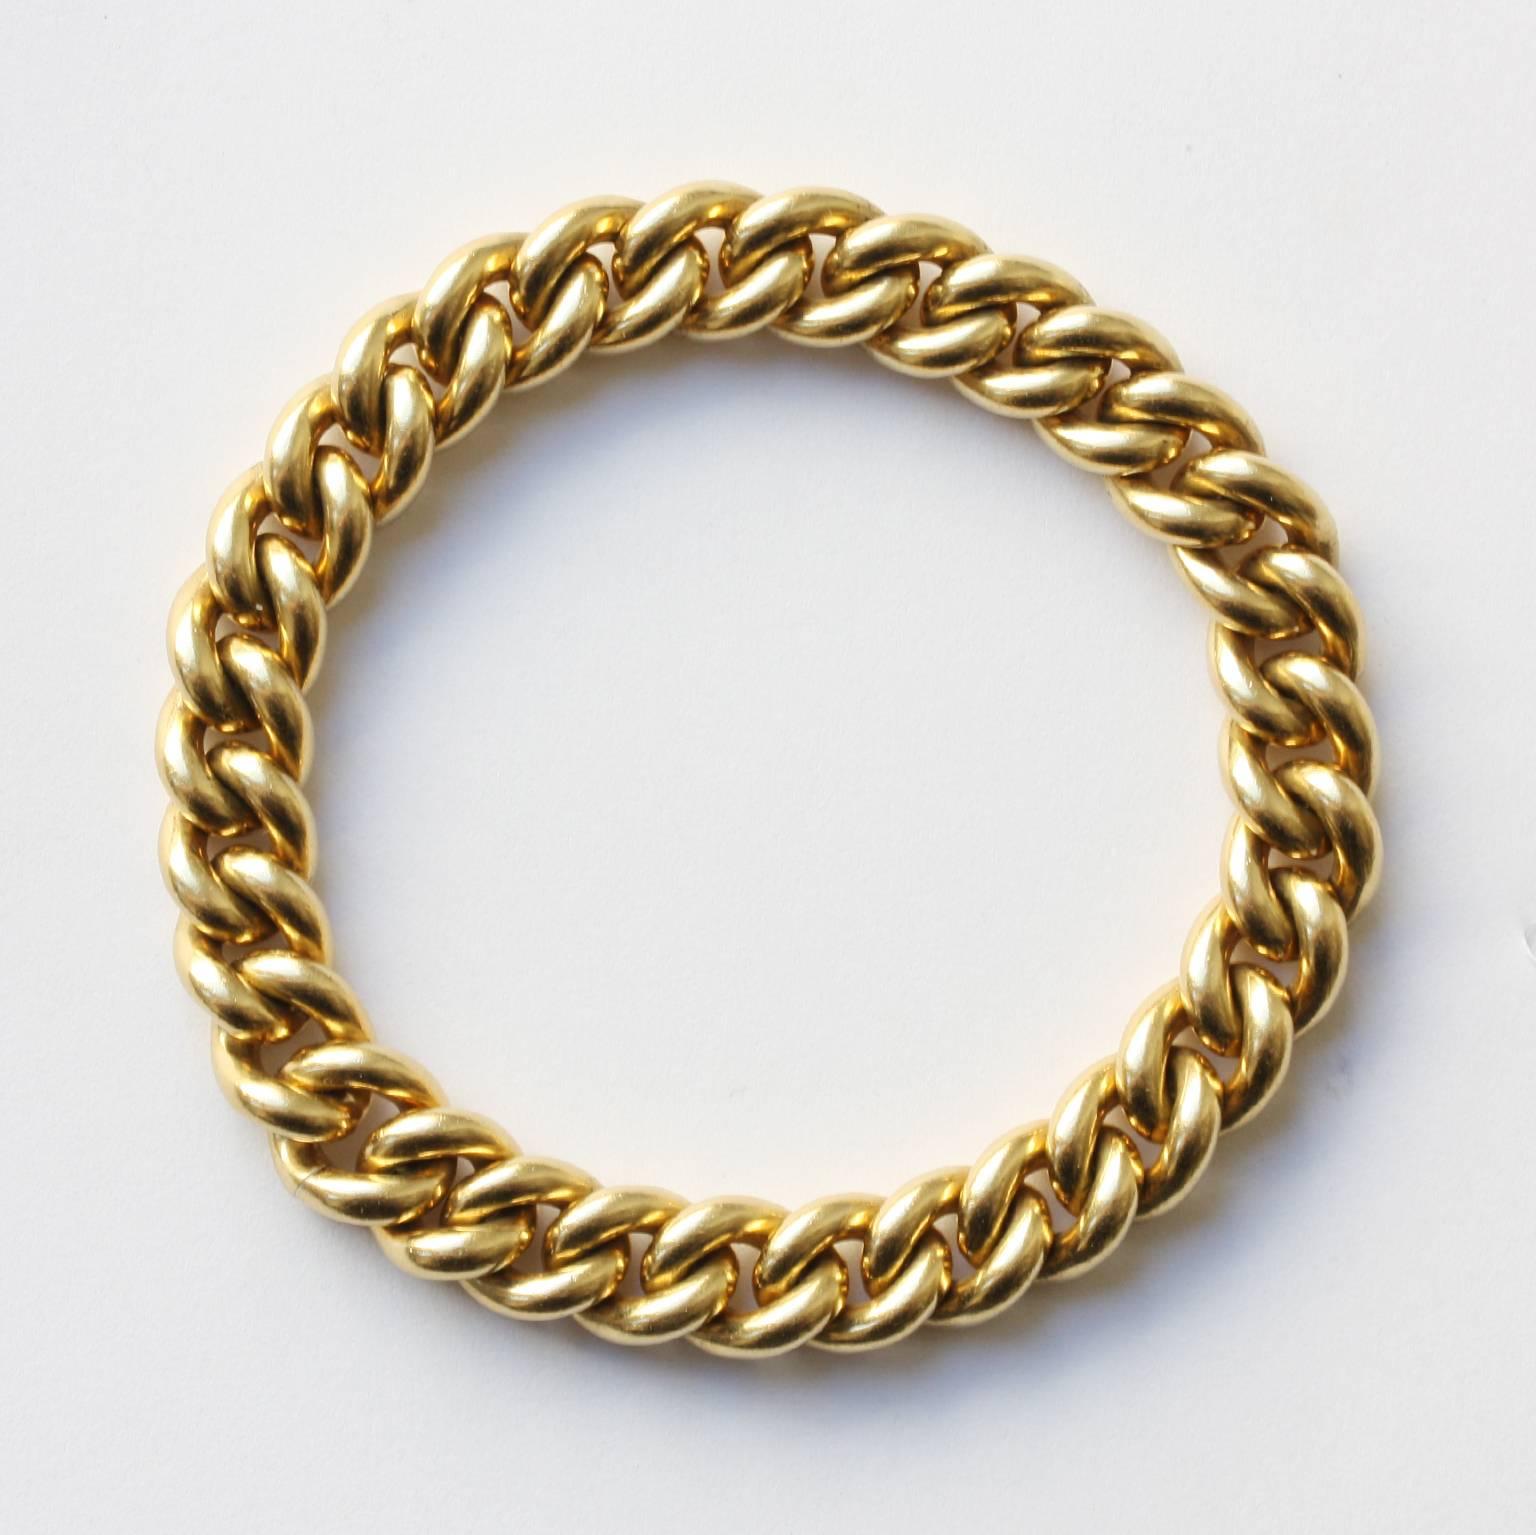 A heavy 18 carat gold vintage curb link bracelet with an invisible lock, signed: Pomellato, Italy.

weight: 78 grams
length: 19 x 0.1 cm.